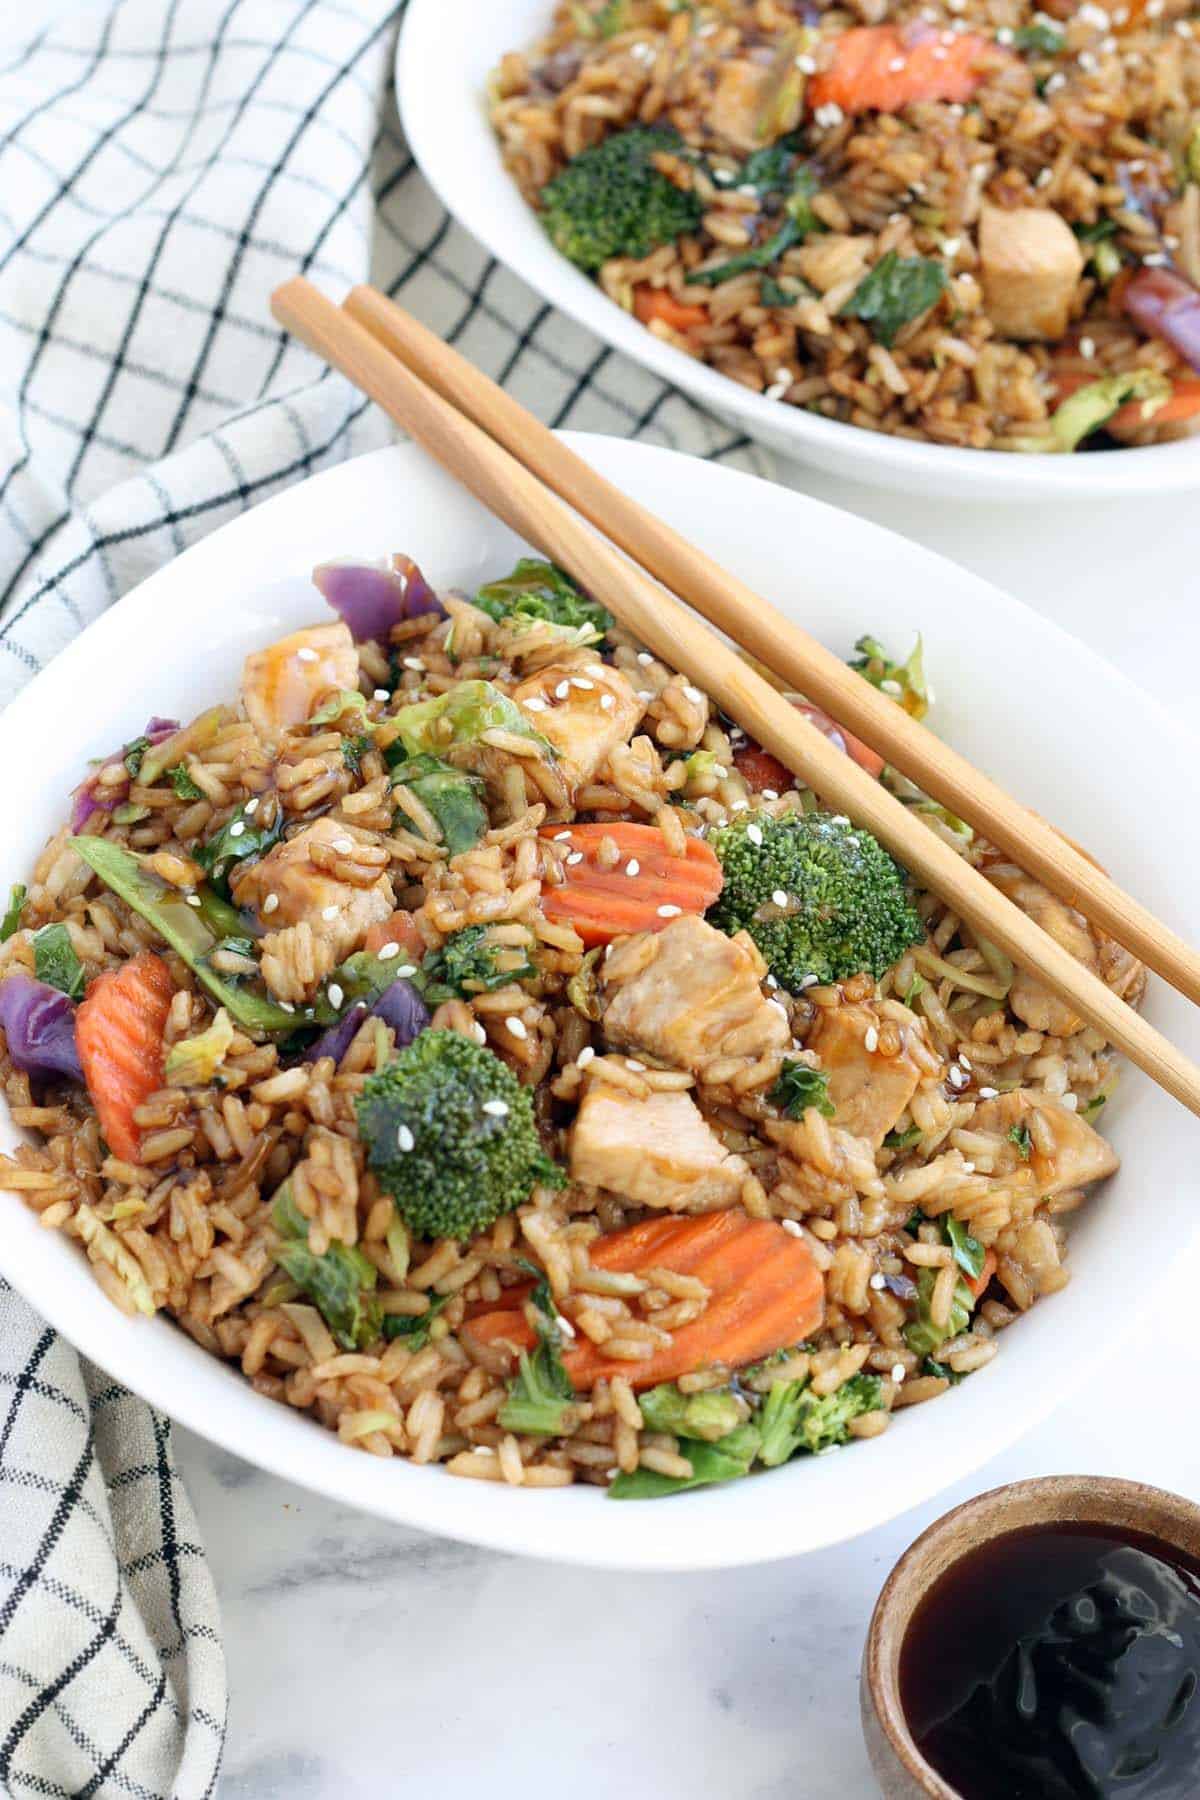 teriyaki chicken and rice in a white bowl with wooden chopsticks